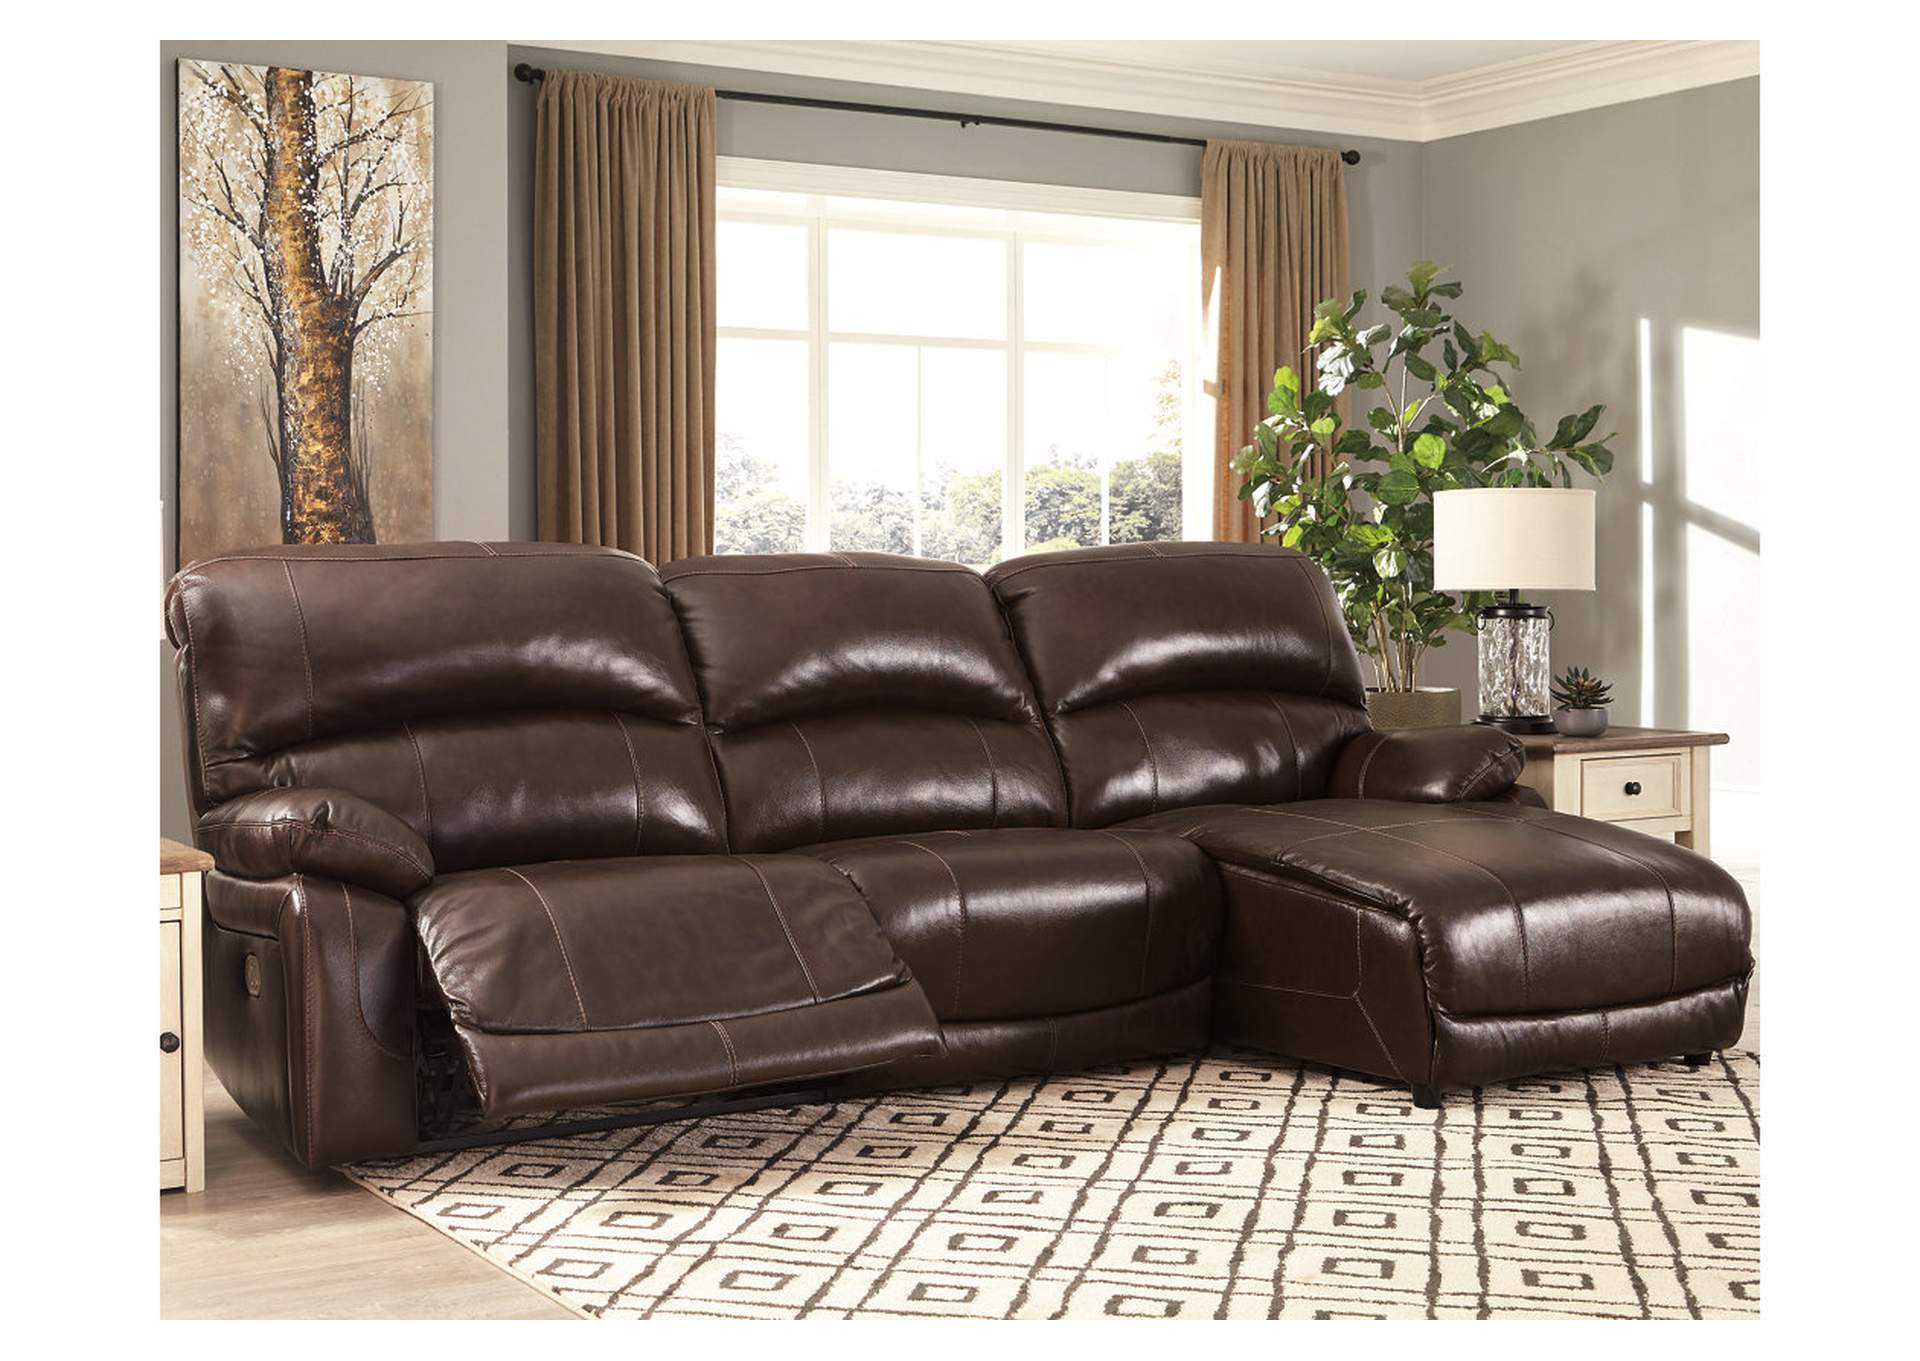 Hallstrung 3-Piece Power Reclining Sectional,Signature Design By Ashley